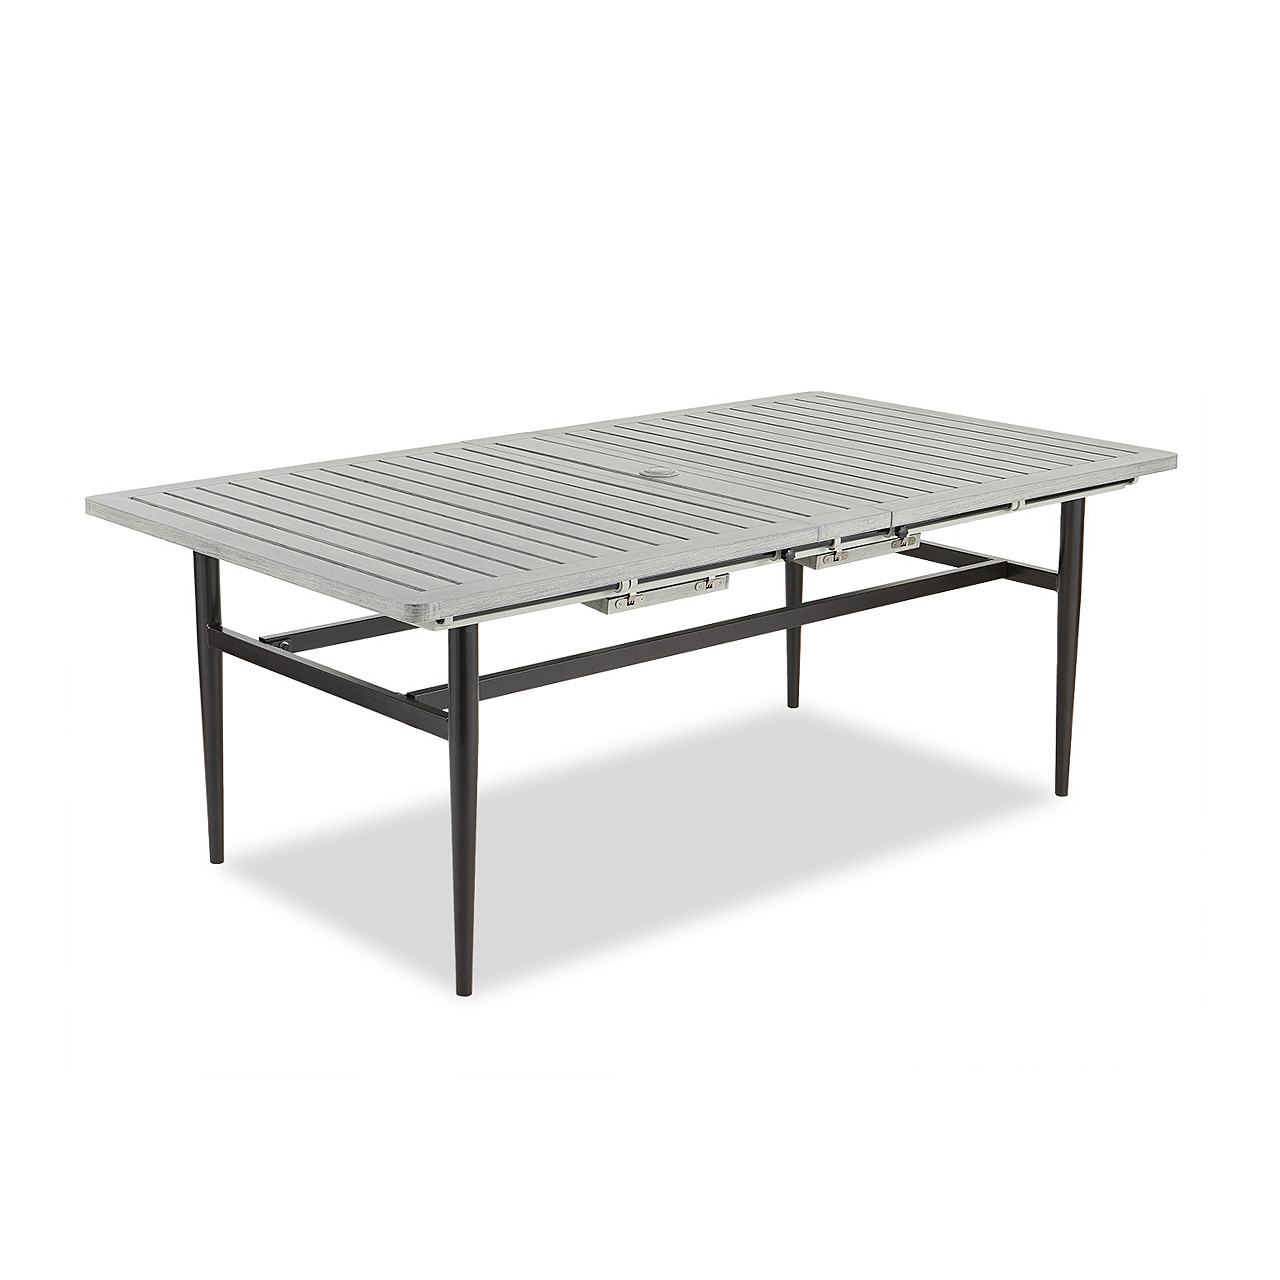 Metro Meteor Cast Aluminum 76-100 x 42 in. Double Extension Dining Table